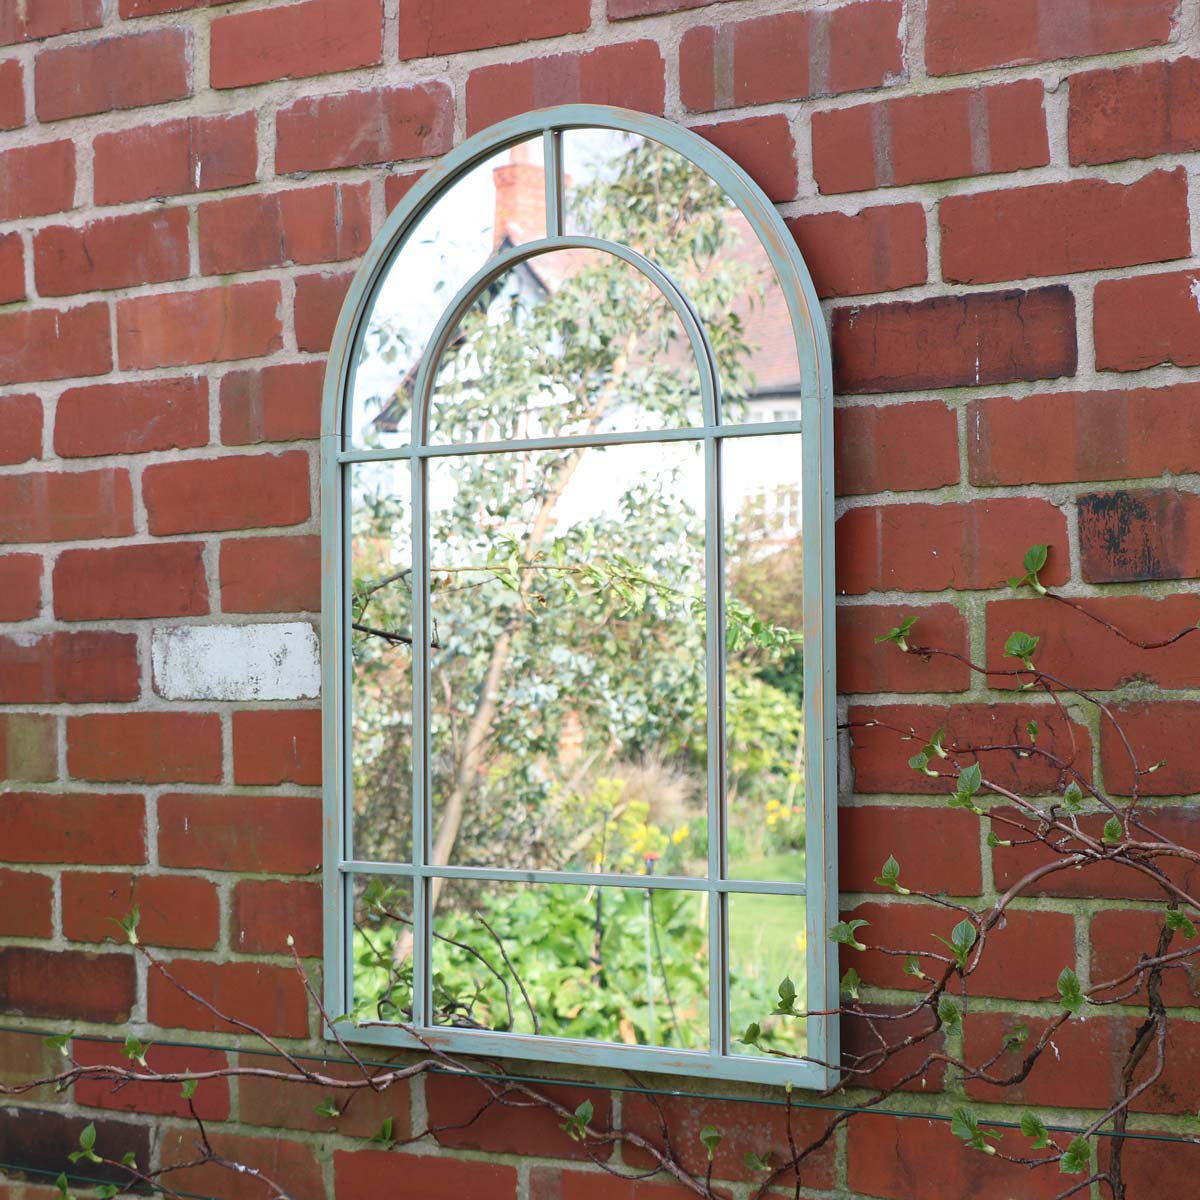 Large French Grey Arched Window Mirror